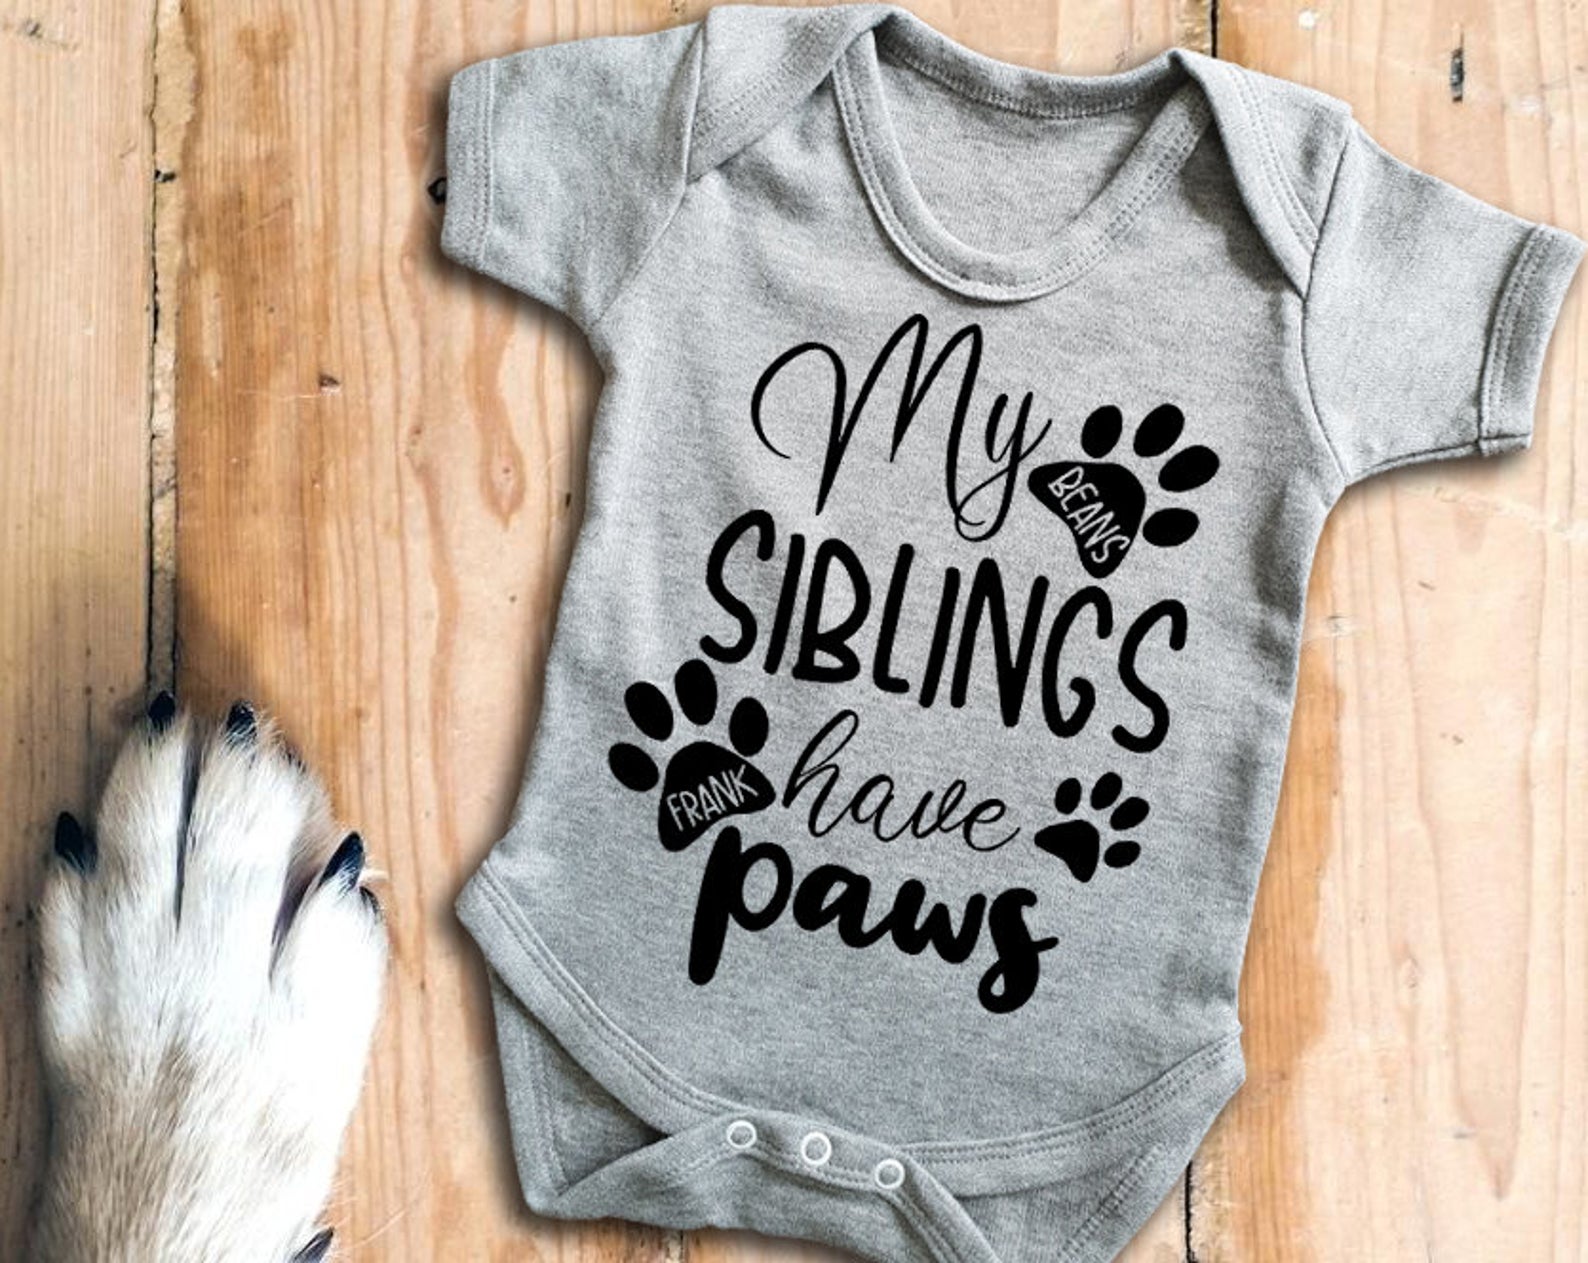 My siblings have paws baby vest